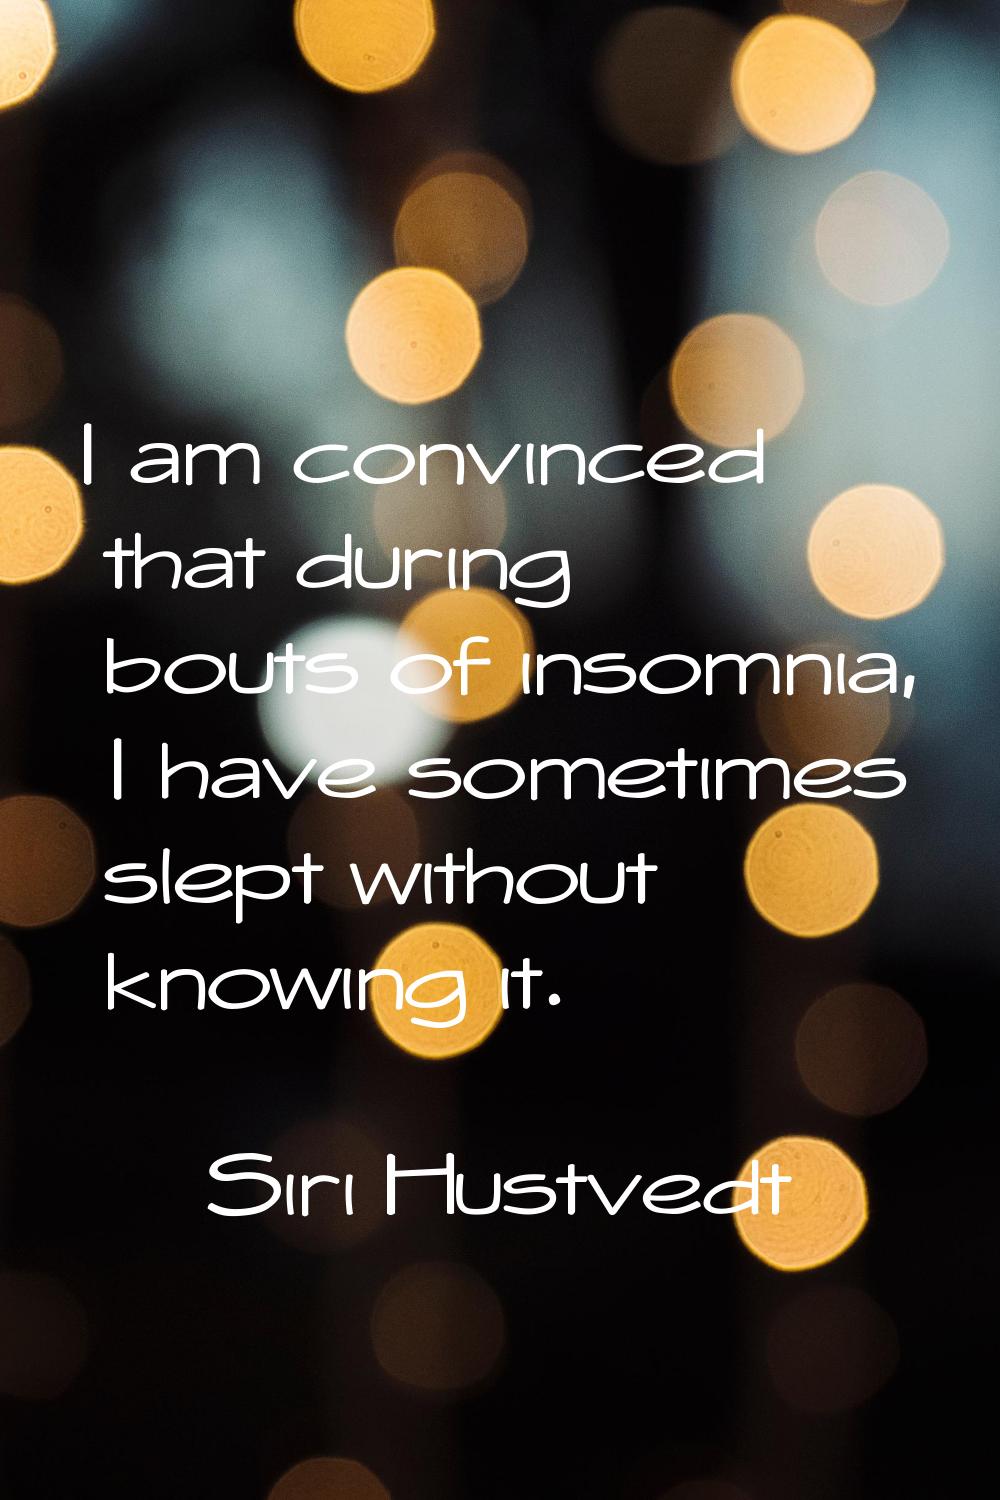 I am convinced that during bouts of insomnia, I have sometimes slept without knowing it.